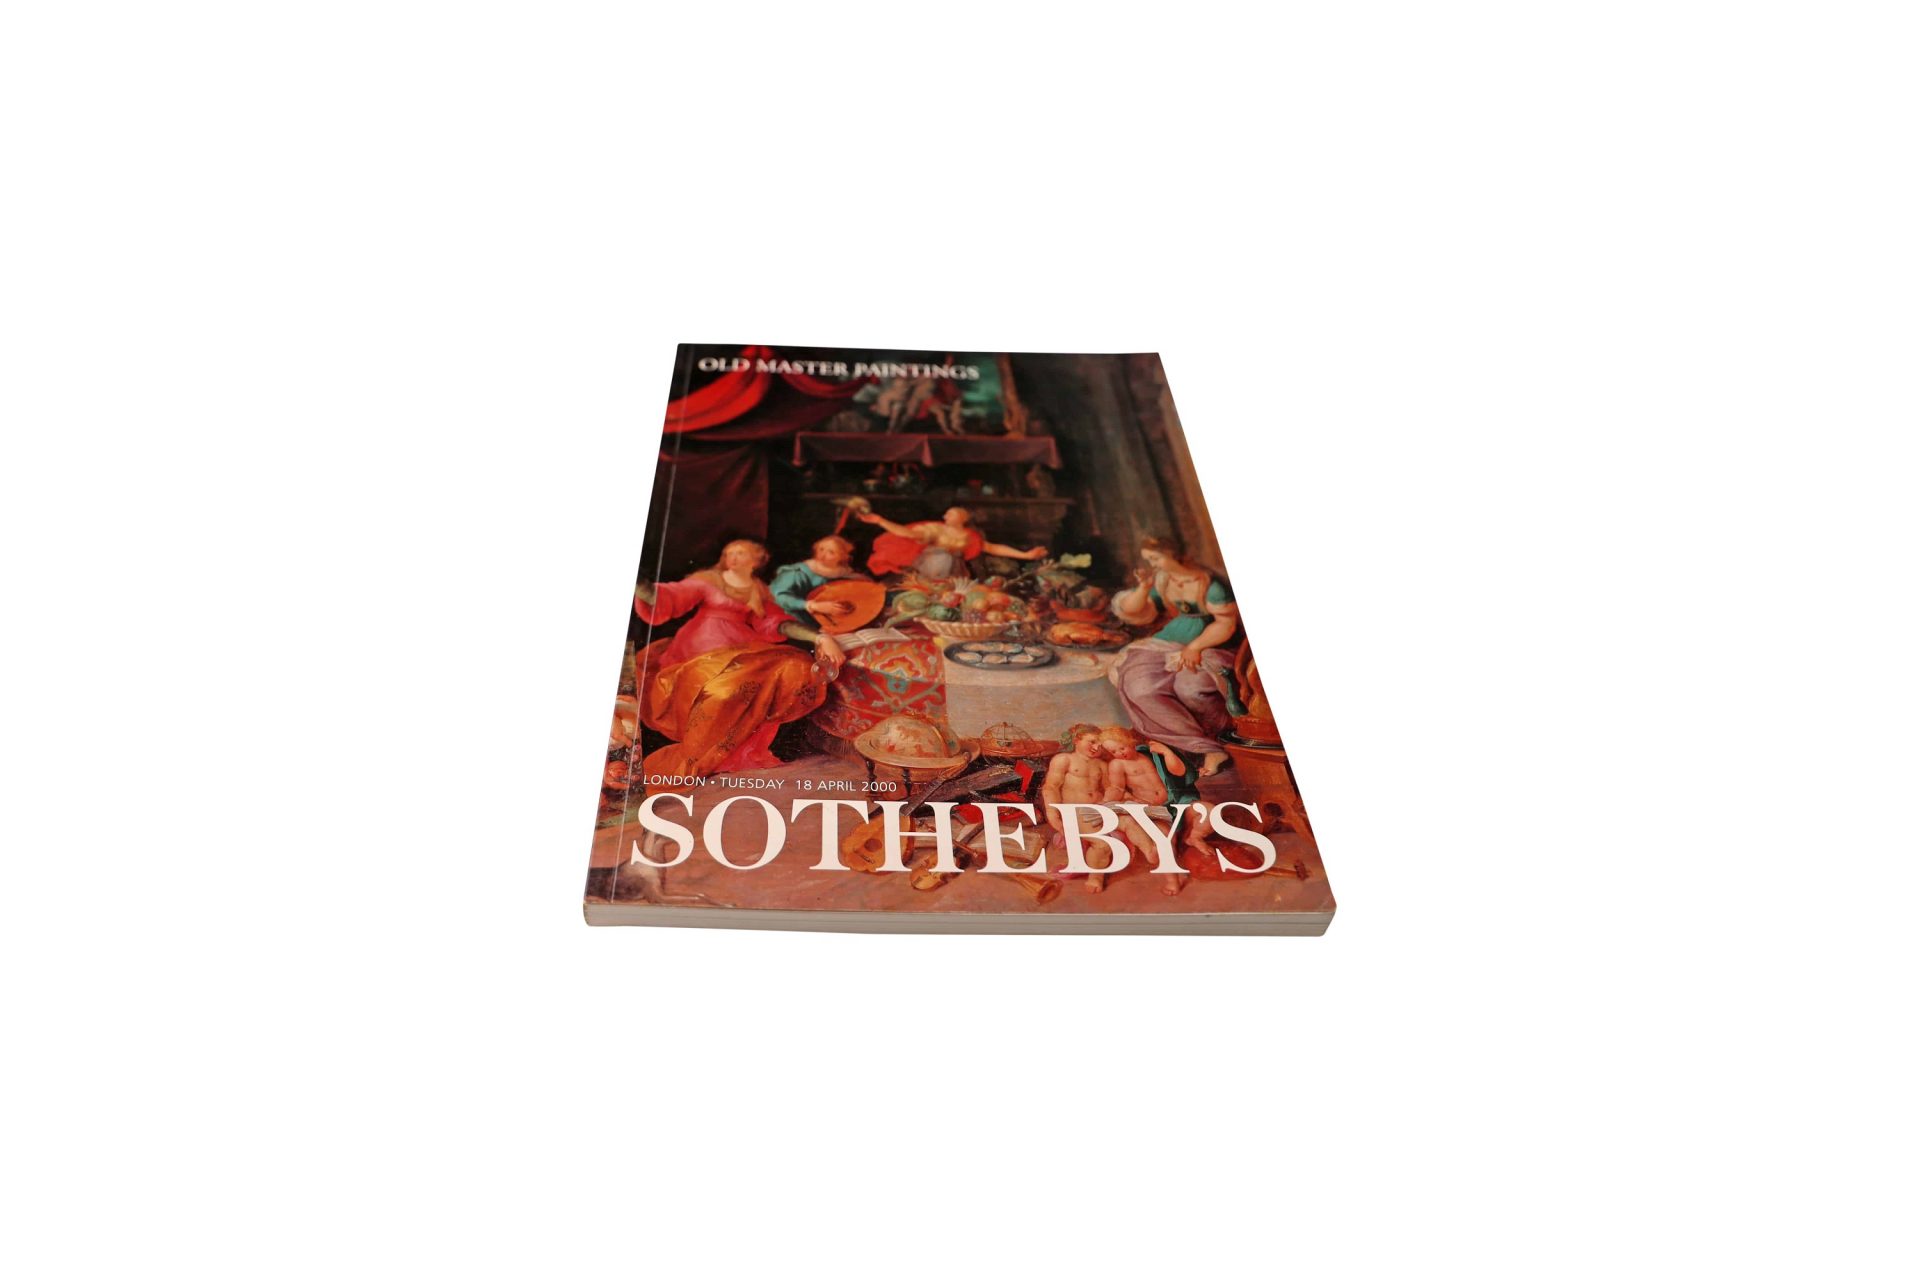 Sotheby's Old Master Painting Landon April 18, 2000 Auction Catalog - Rare Watch Parts